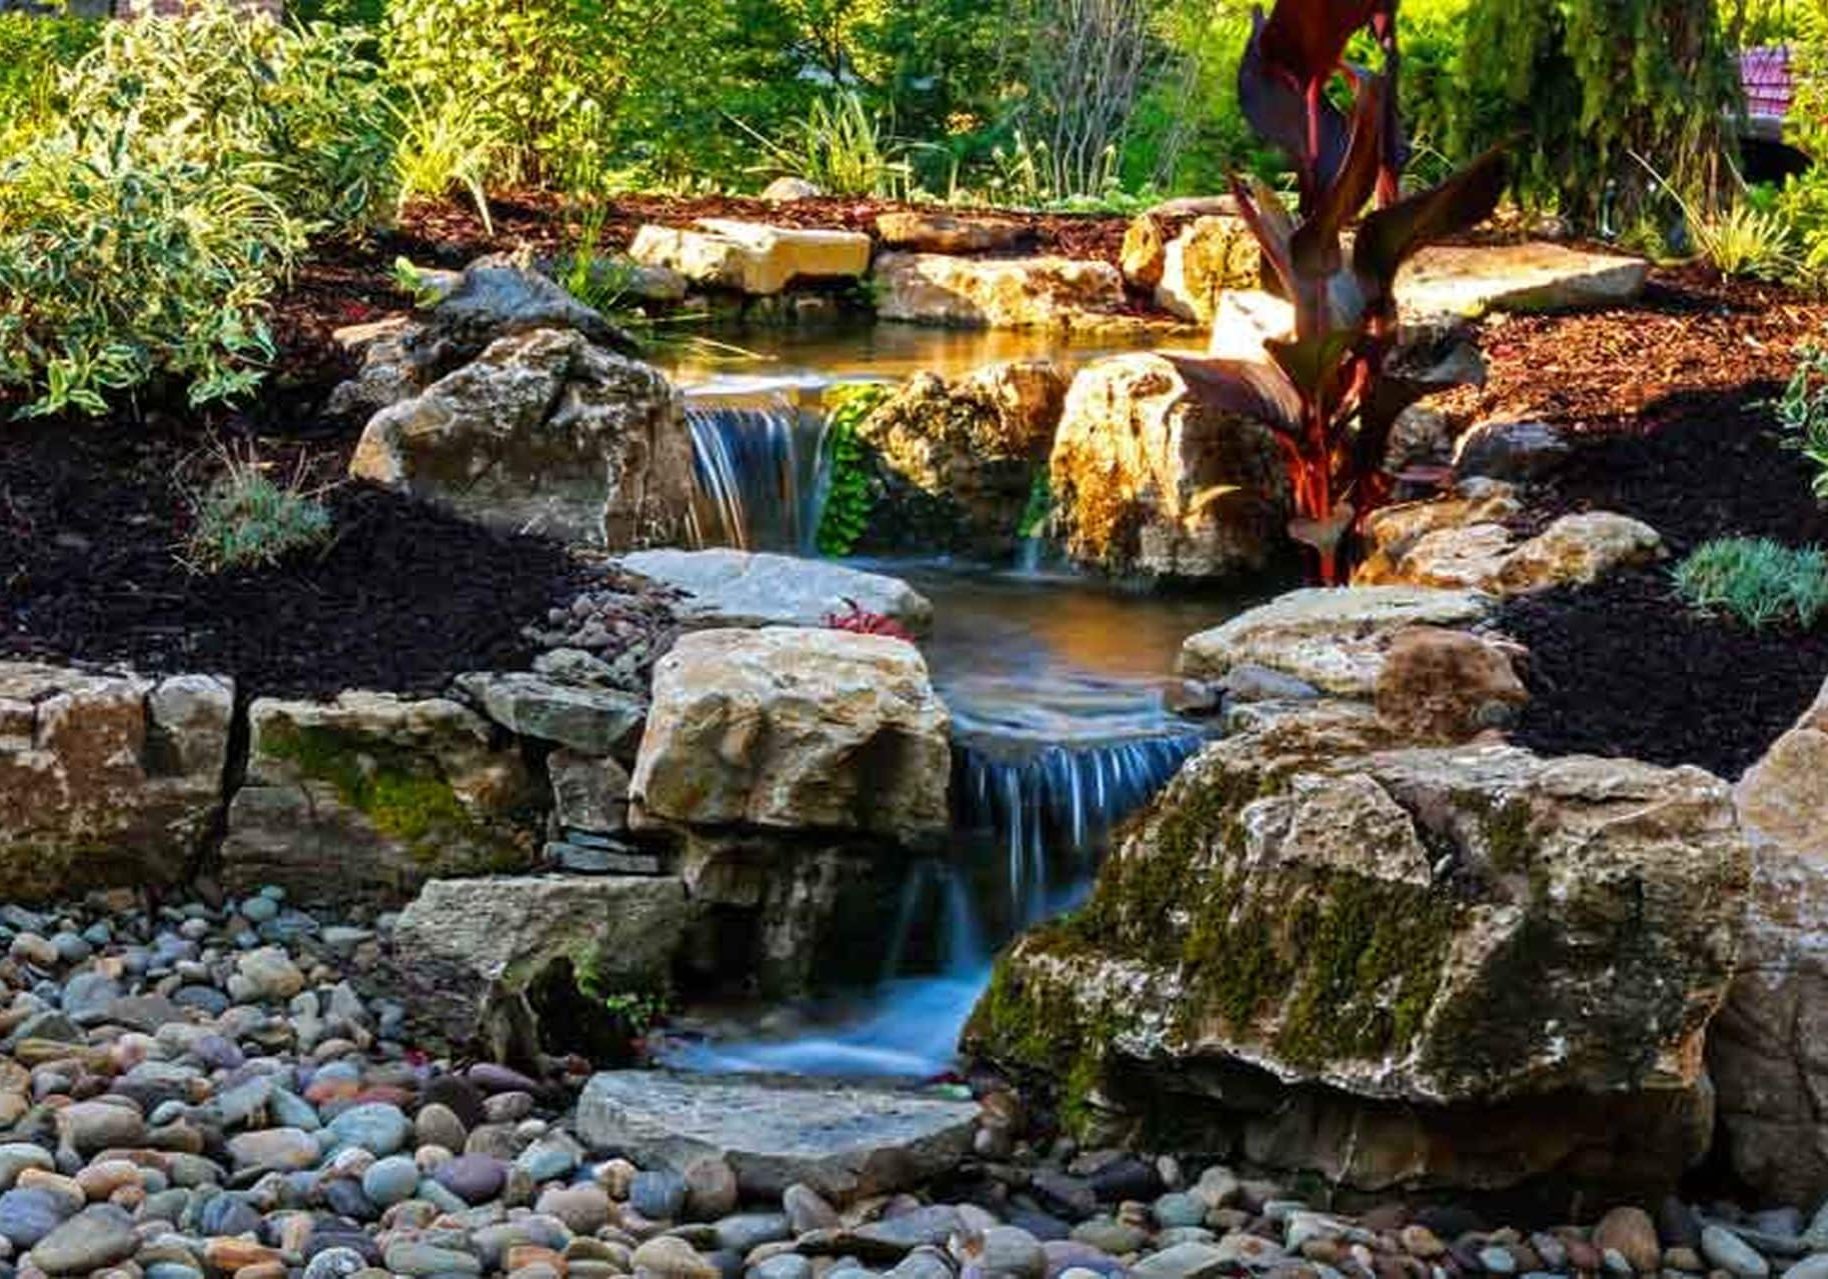 A waterfall in a garden with rocks and plants.